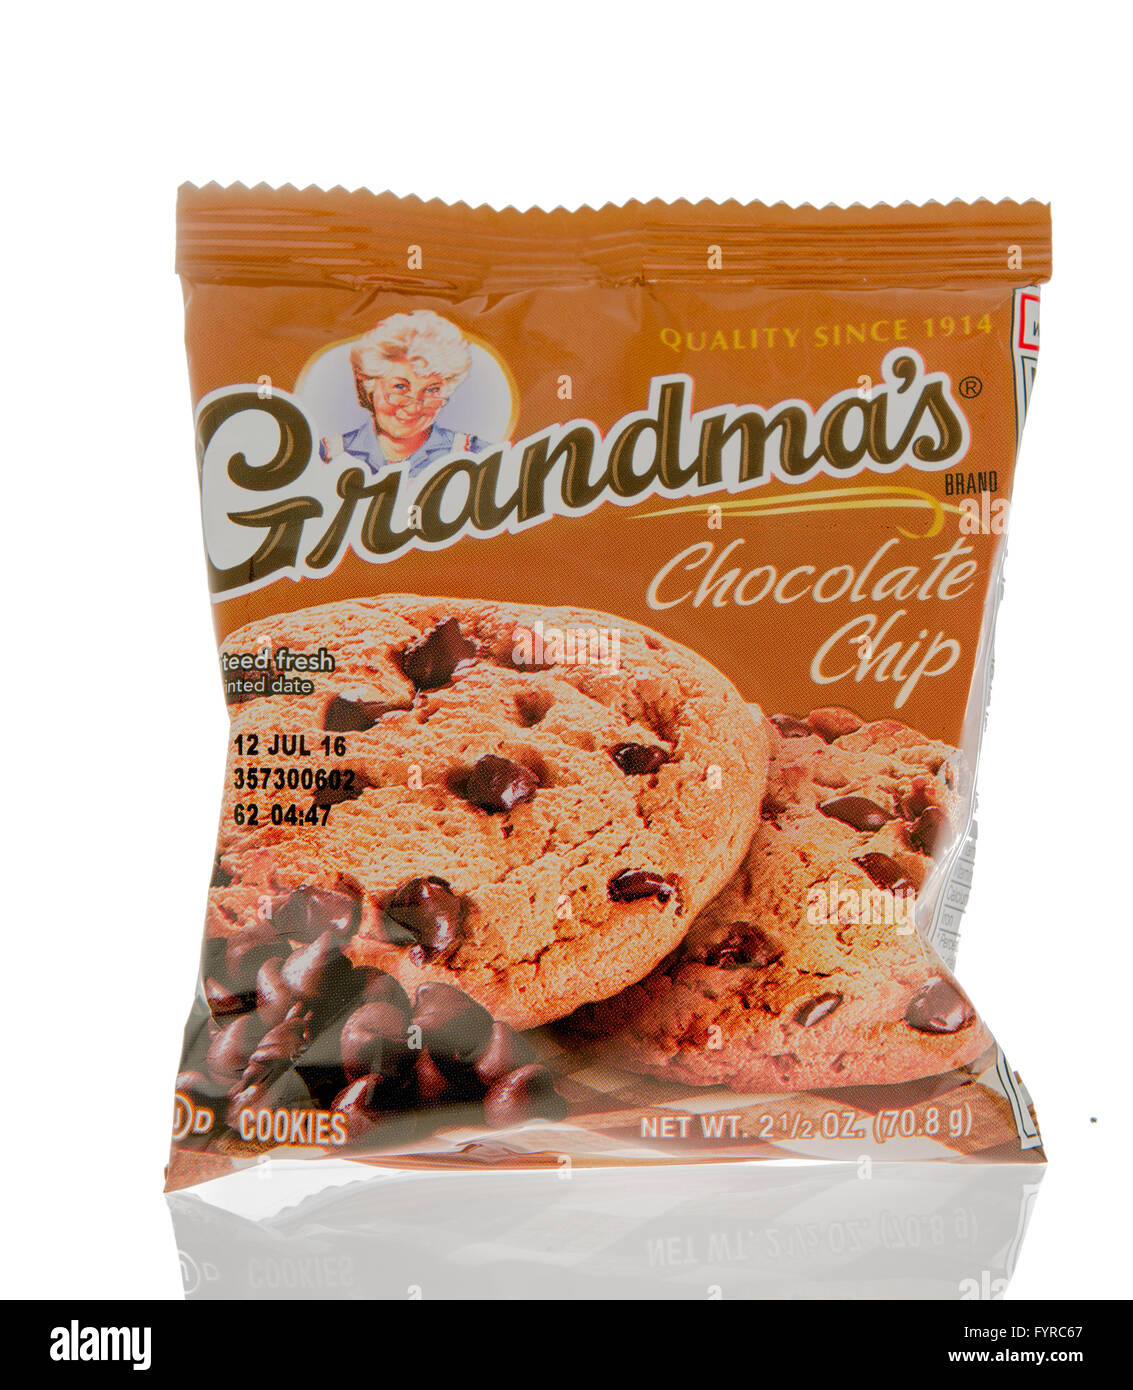 Winneconne, WI - 1 March 2016: A package of Grandma's cookies in chocolate chip flavor Stock Photo